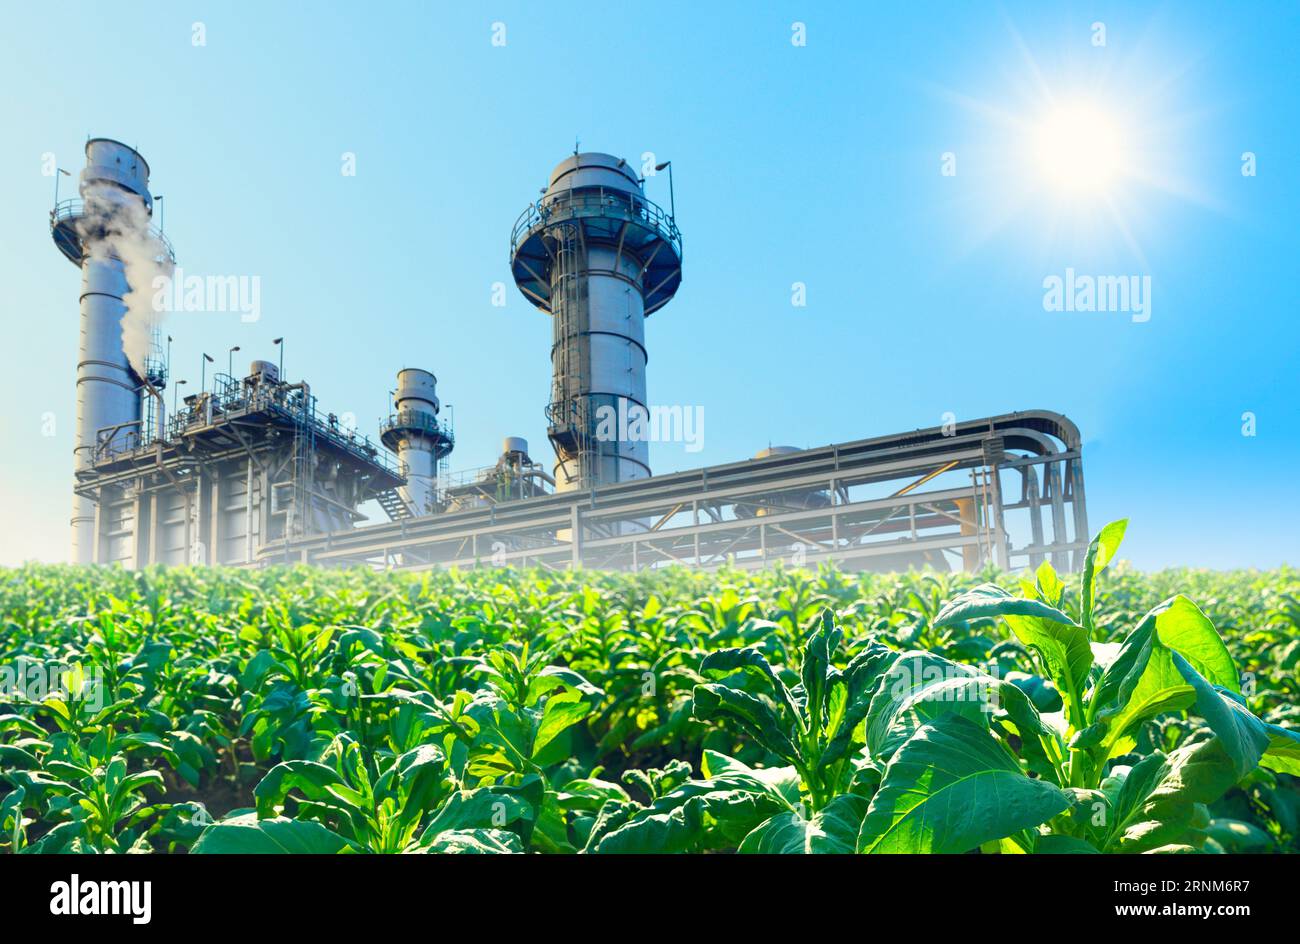 Green Industry with agriculture field. Eco power plant, Petroleum production saving environmental. Sustainable Factory concept Stock Photo